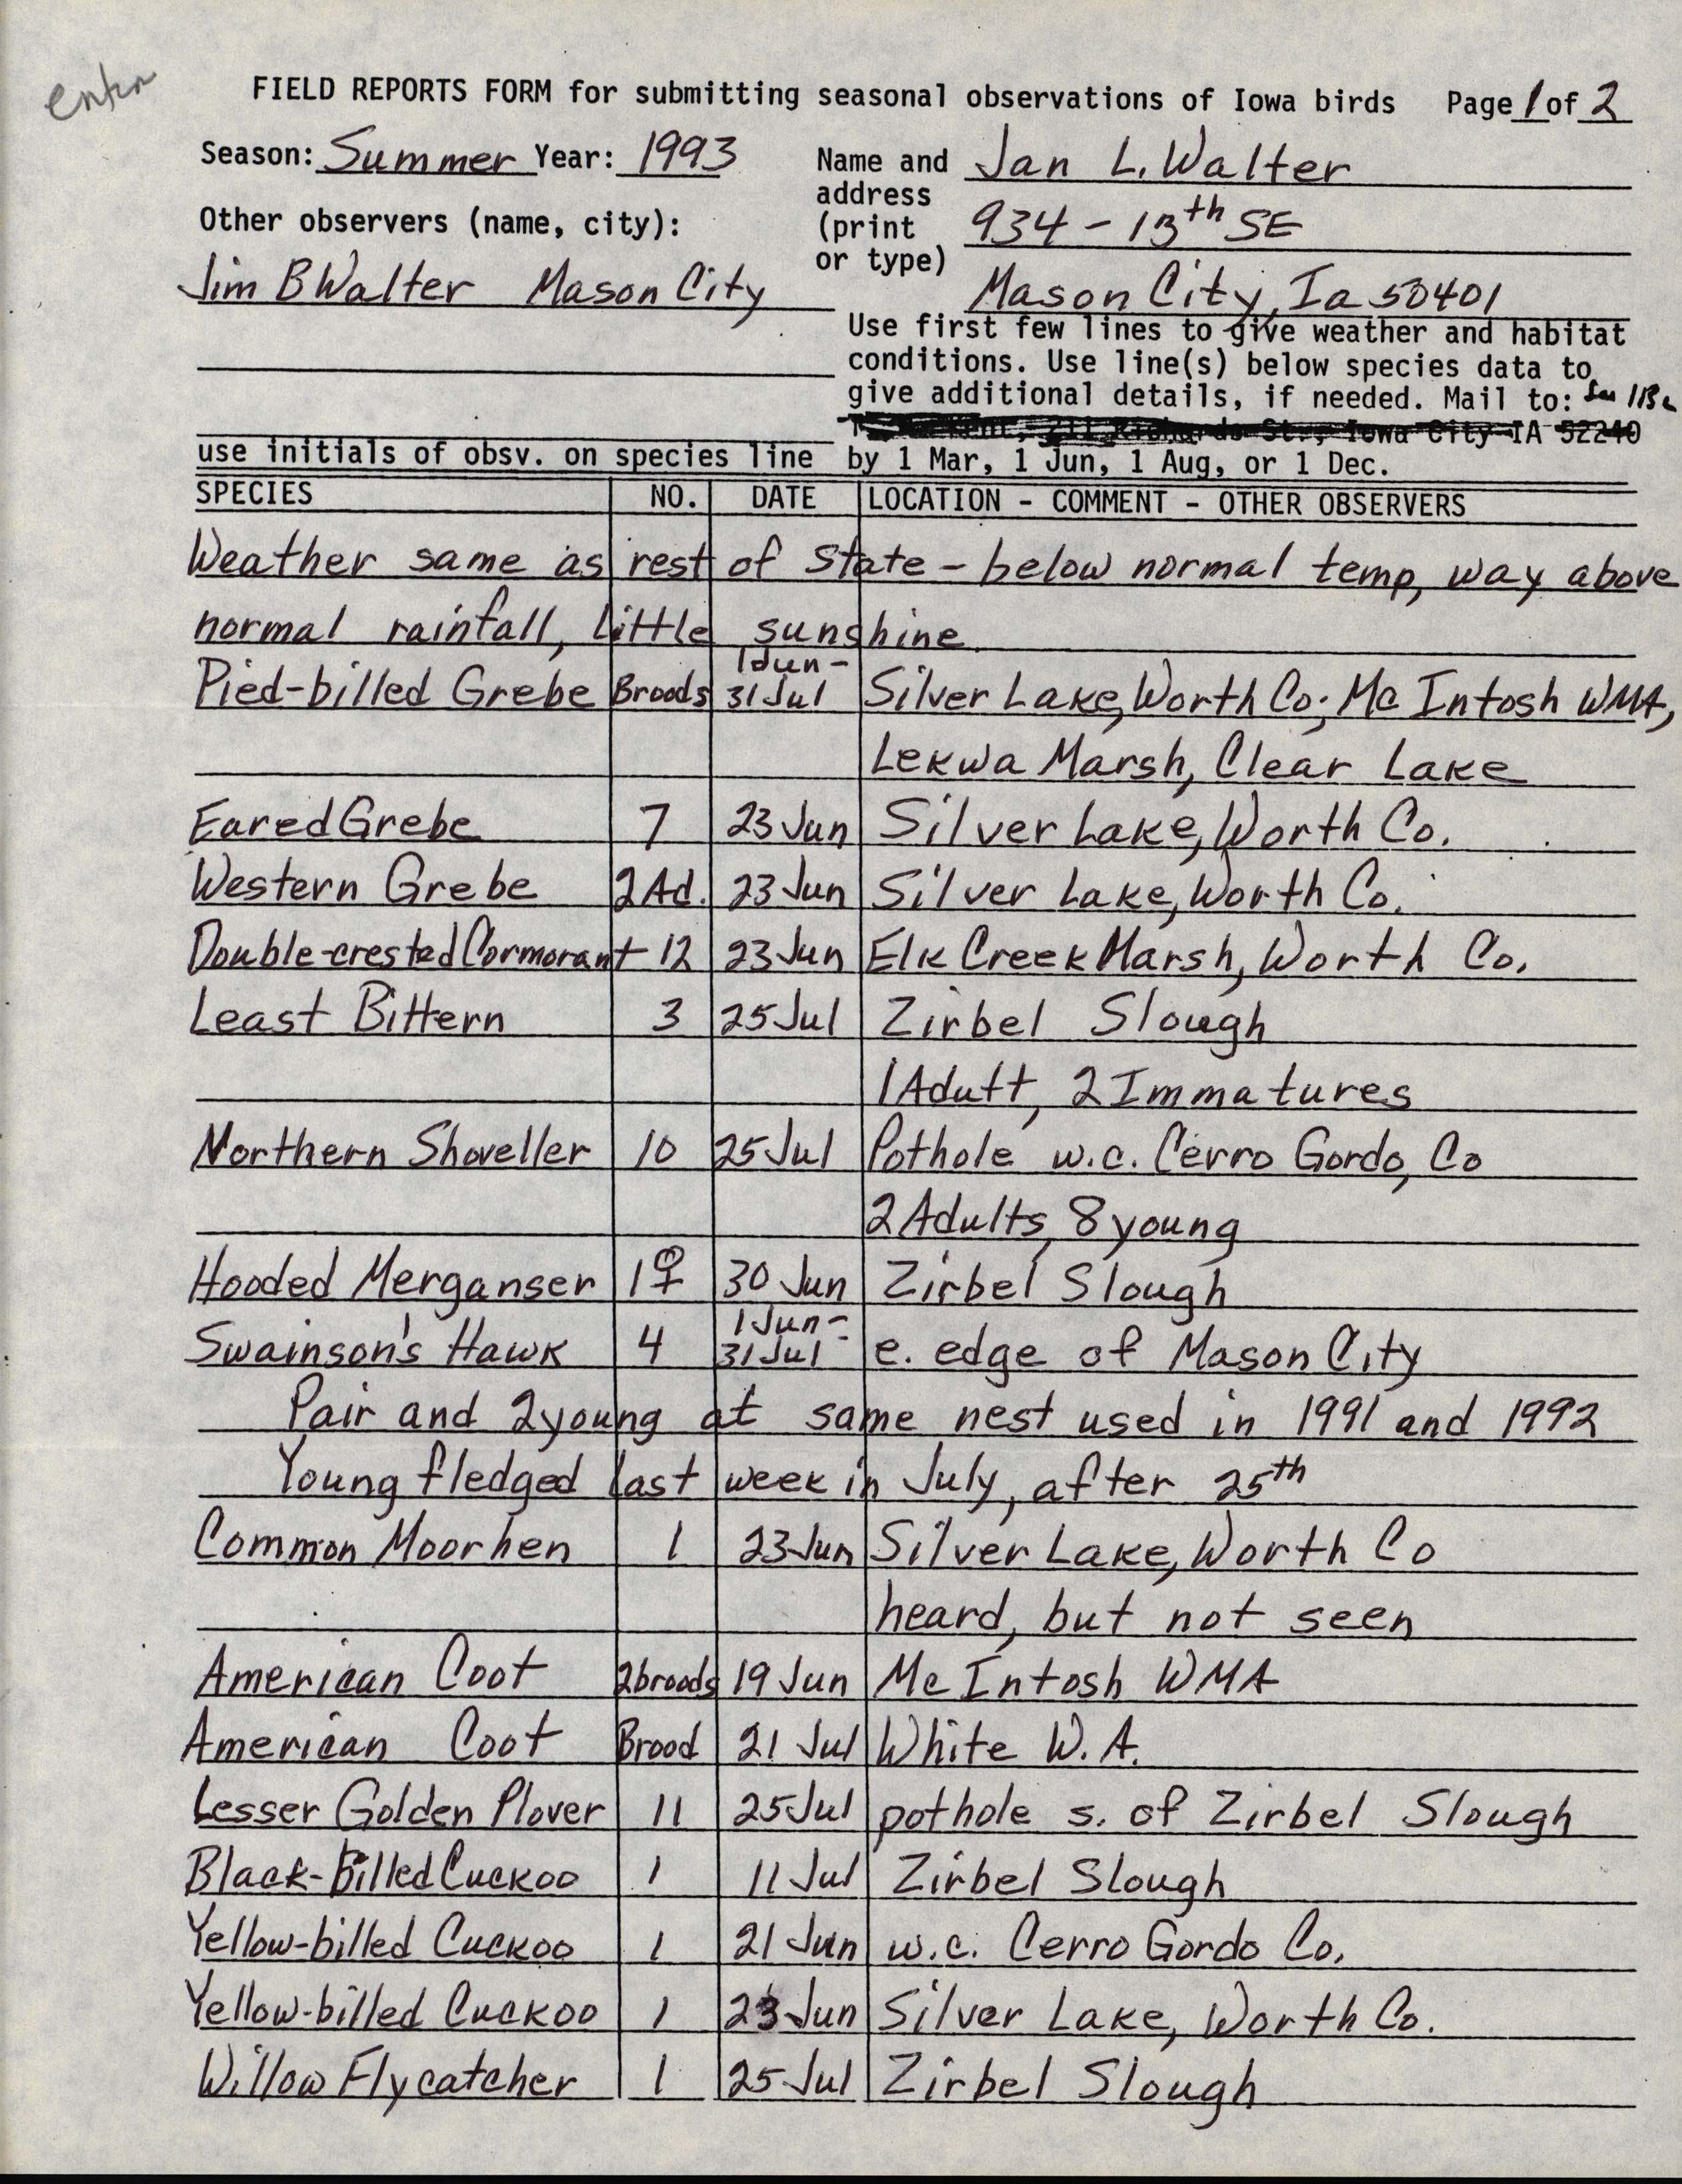 Field reports form for submitting seasonal observations of Iowa birds, Jan L. Walter, summer 1993